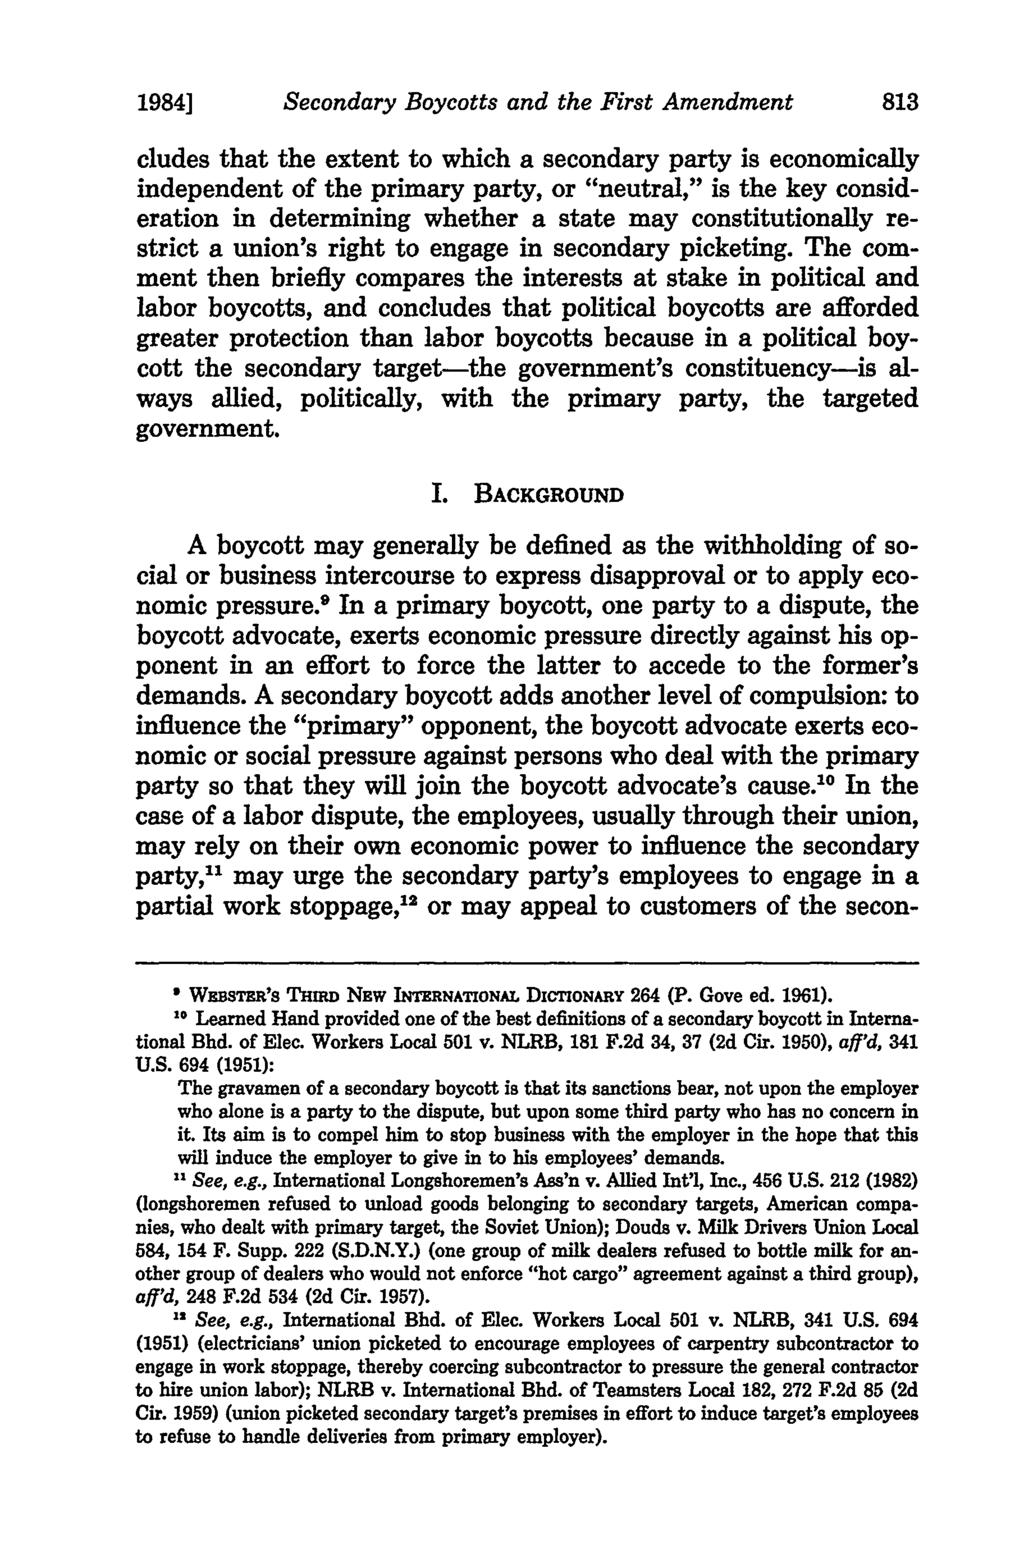 1984] Secondary Boycotts and the First Amendment eludes that the extent to which a secondary party is economically independent of the primary party, or "neutral," is the key consideration in